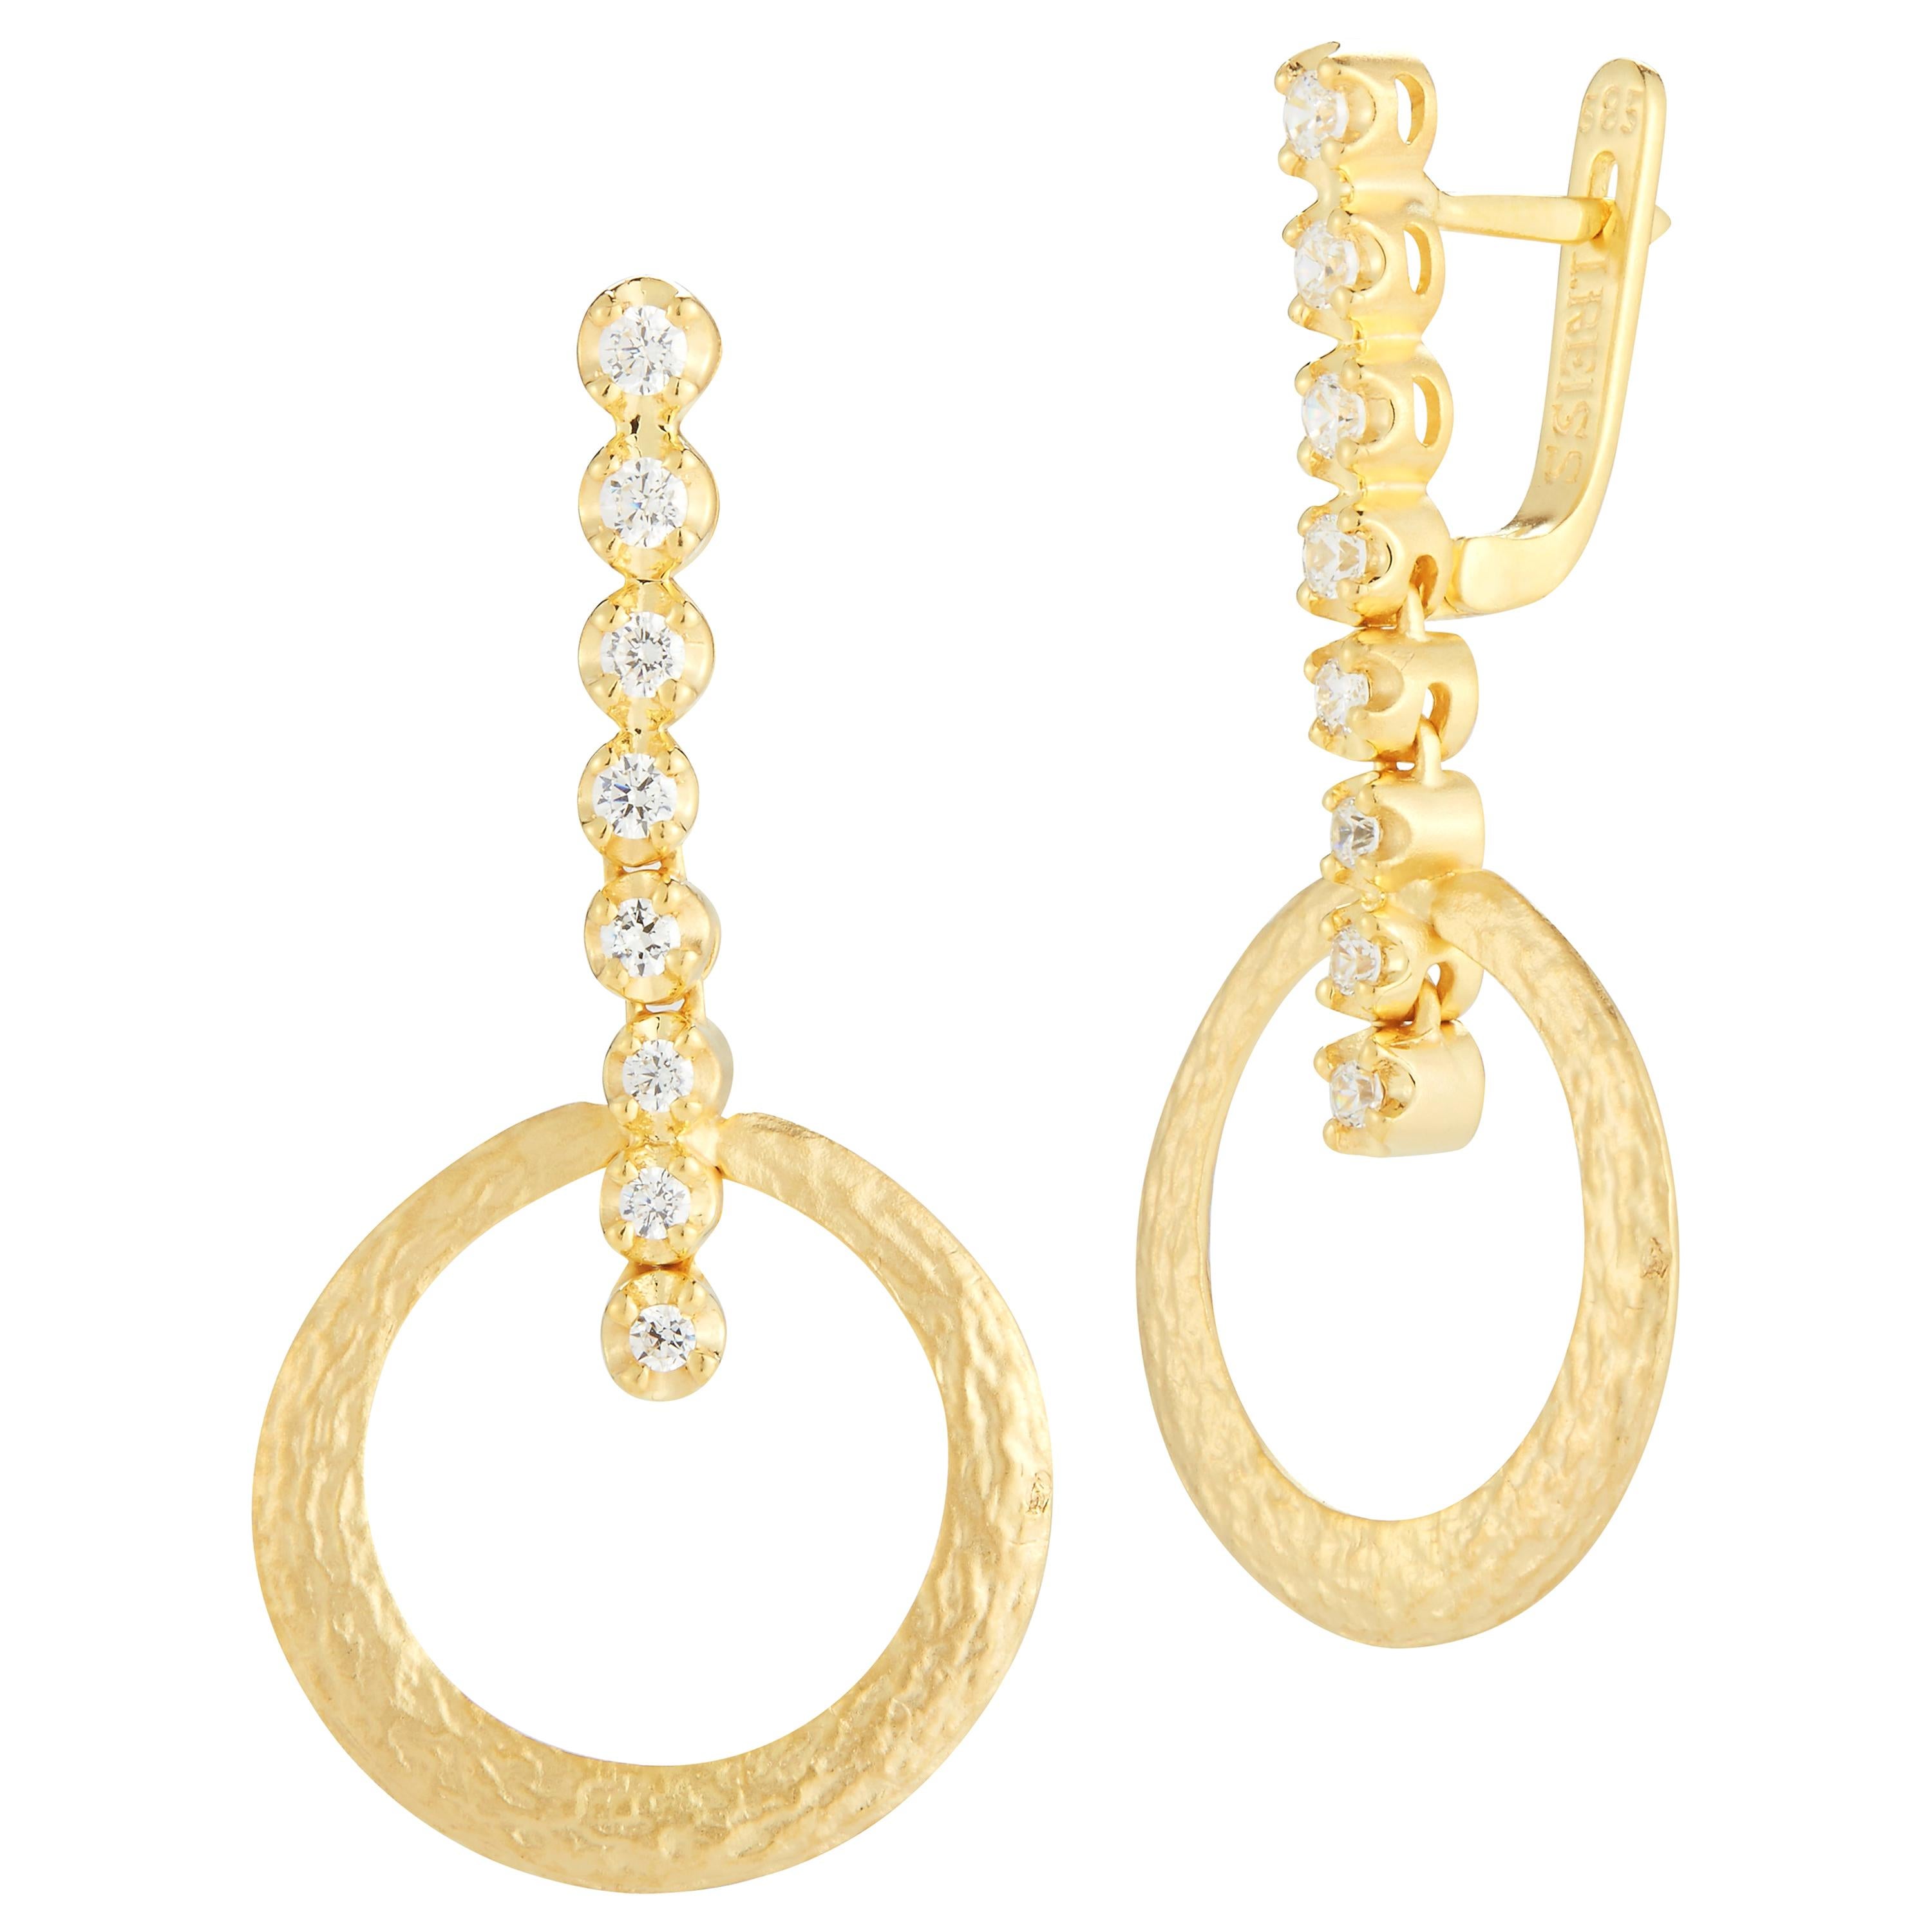 Handcrafted 14 Karat Yellow Gold Dangling Open Circle Earrings For Sale